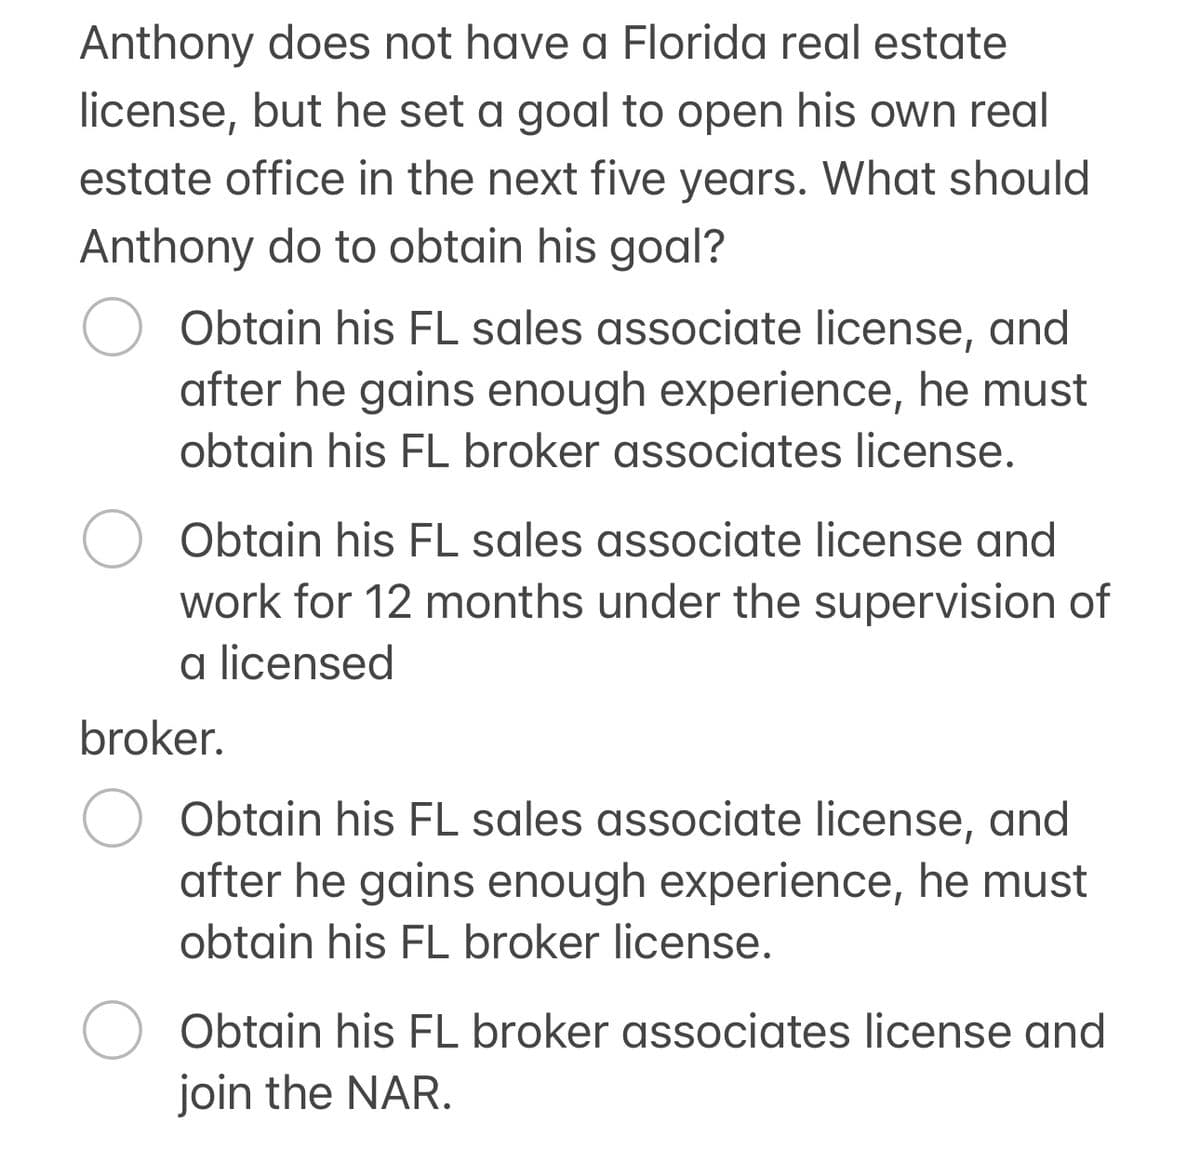 Anthony does not have a Florida real estate
license, but he set a goal to open his own real
estate office in the next five years. What should
Anthony do to obtain his goal?
Obtain his FL sales associate license, and
after he gains enough experience, he must
obtain his FL broker associates license.
○ Obtain his FL sales associate license and
work for 12 months under the supervision of
a licensed
broker.
Obtain his FL sales associate license, and
after he gains enough experience, he must
obtain his FL broker license.
Obtain his FL broker associates license and
join the NAR.